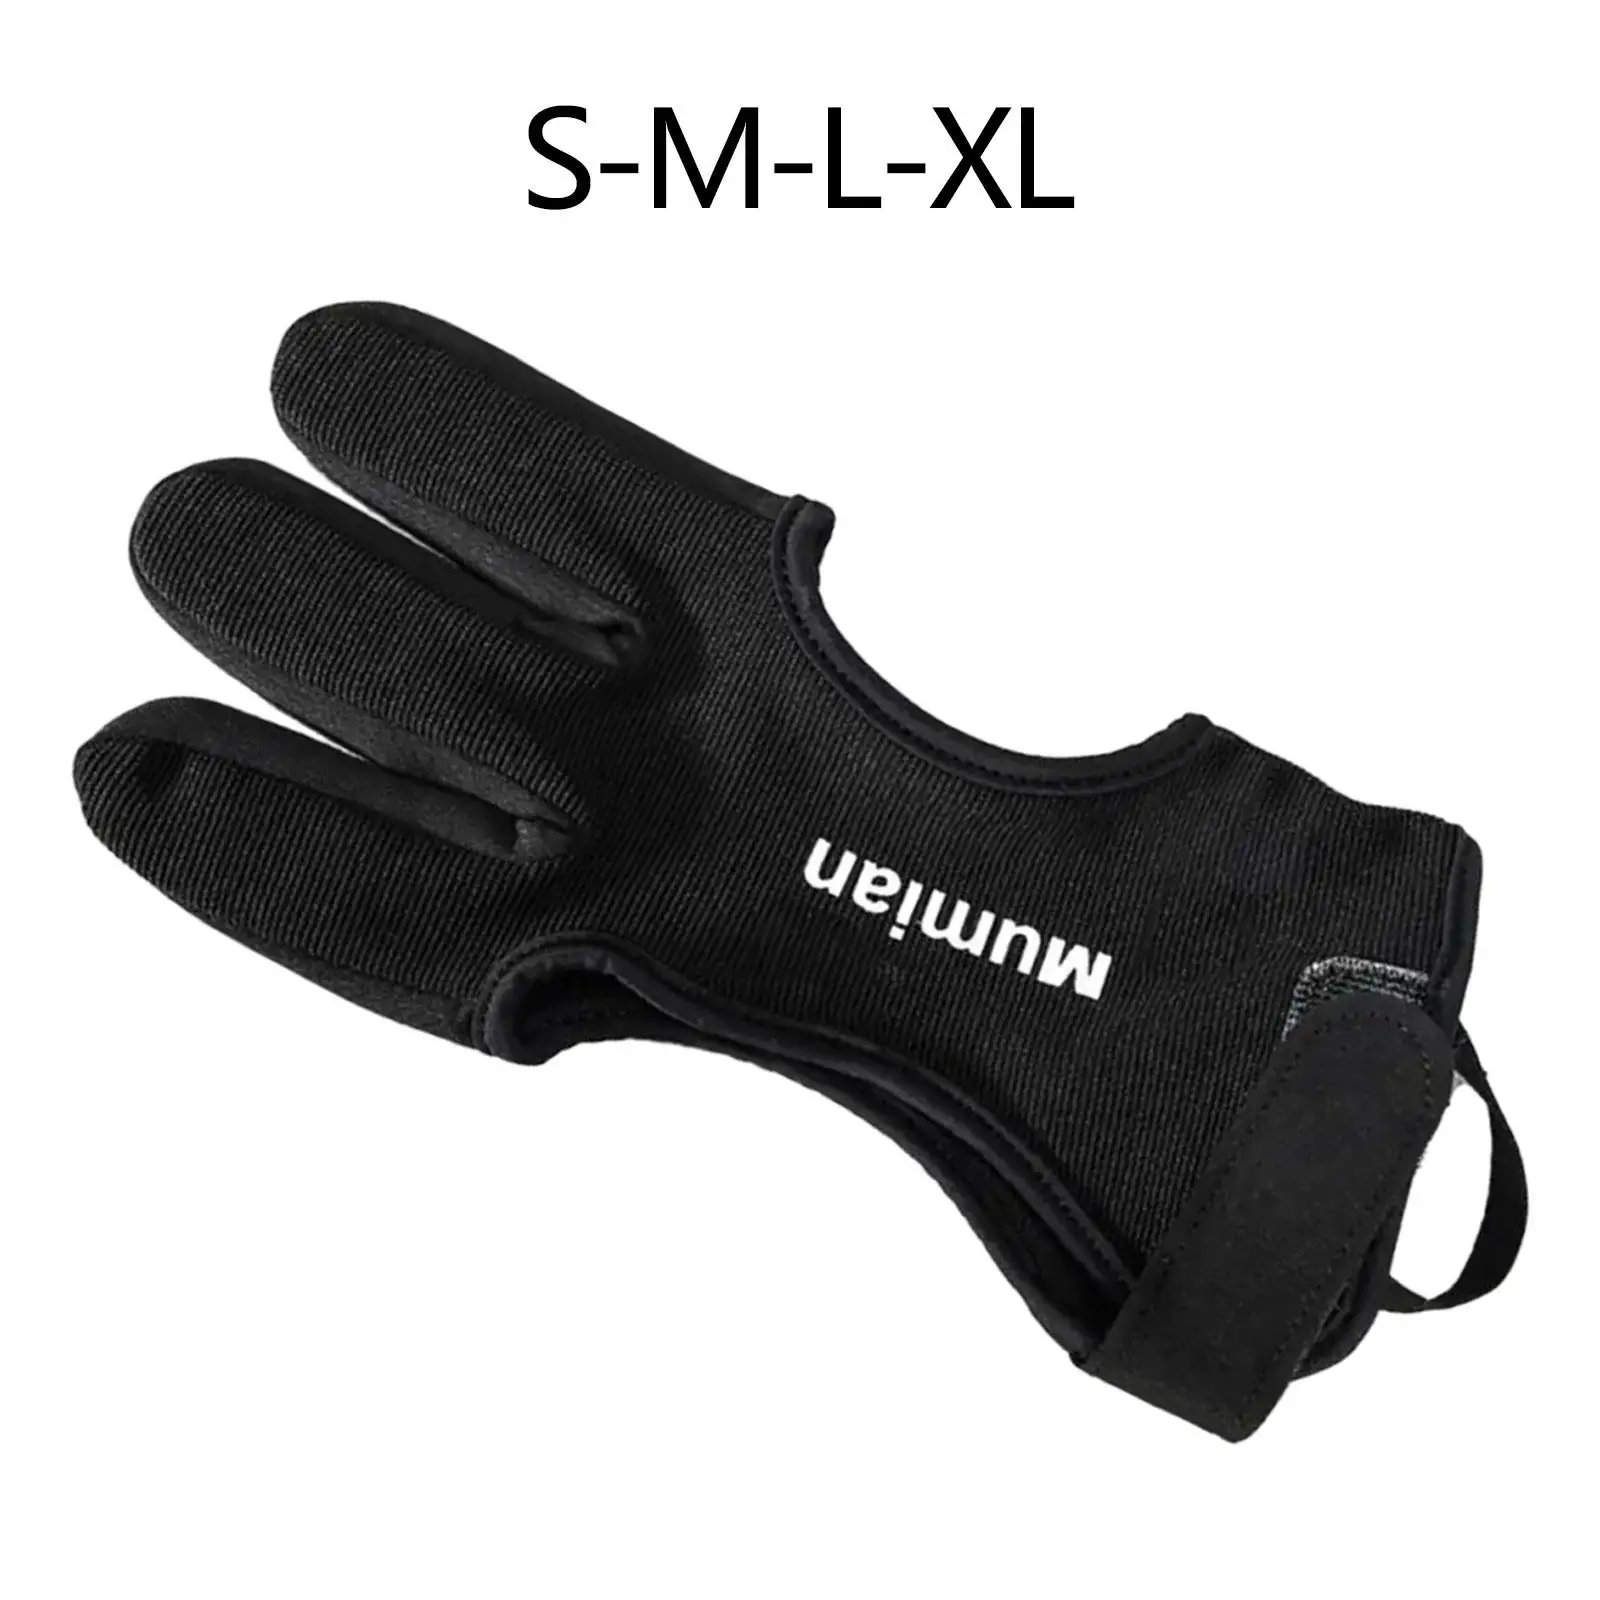 Archery Glove Nonslip Padded Tips for Grip Stability for Recurve Compound Bow Archery Finger Guard for Beginner Men Women Adult